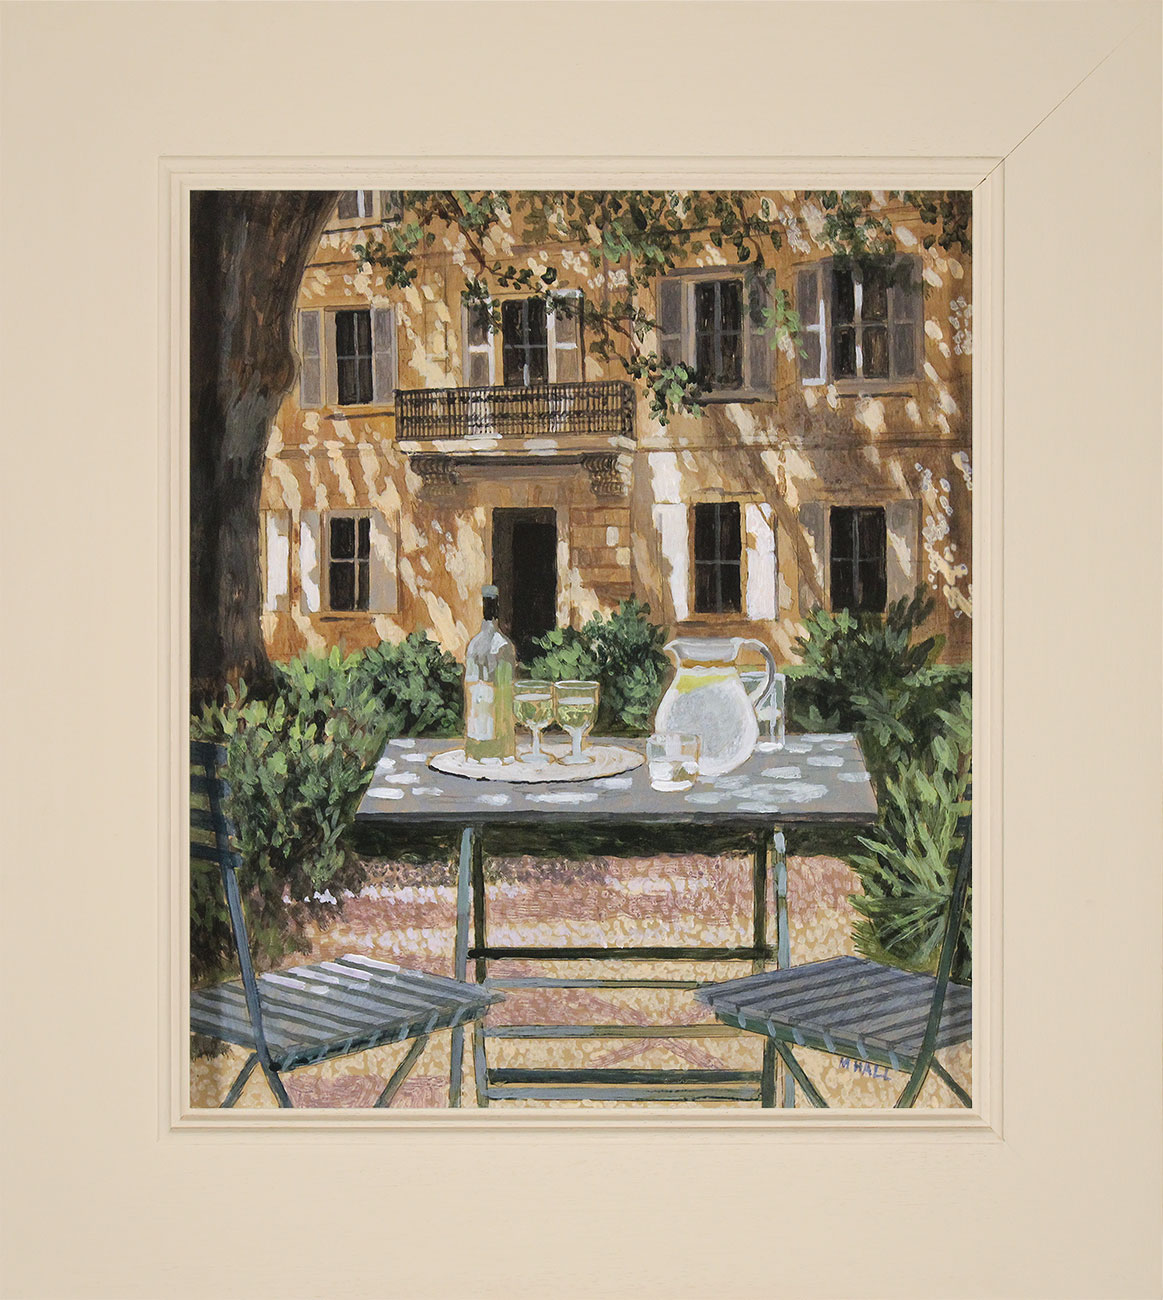 Mike Hall, Original acrylic painting on board, Cool Drinks in the Shade II. Click to enlarge